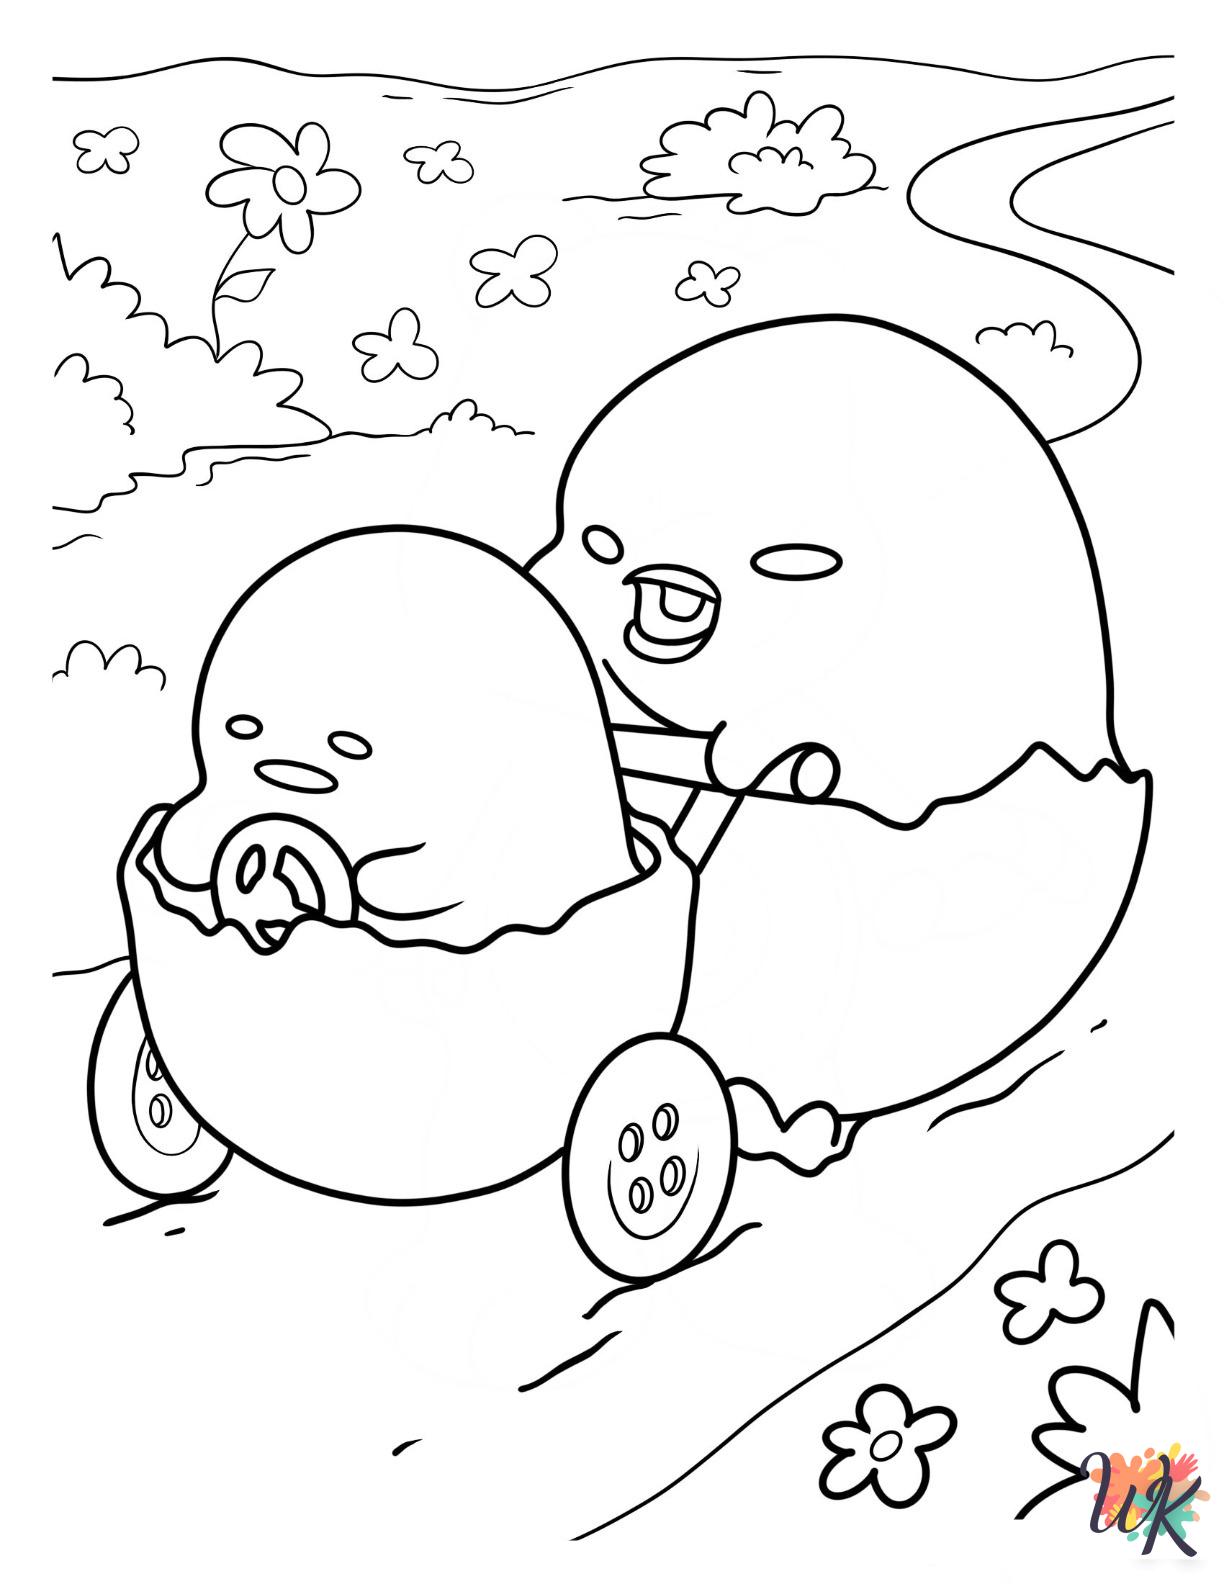 detailed Gudetama coloring pages for adults